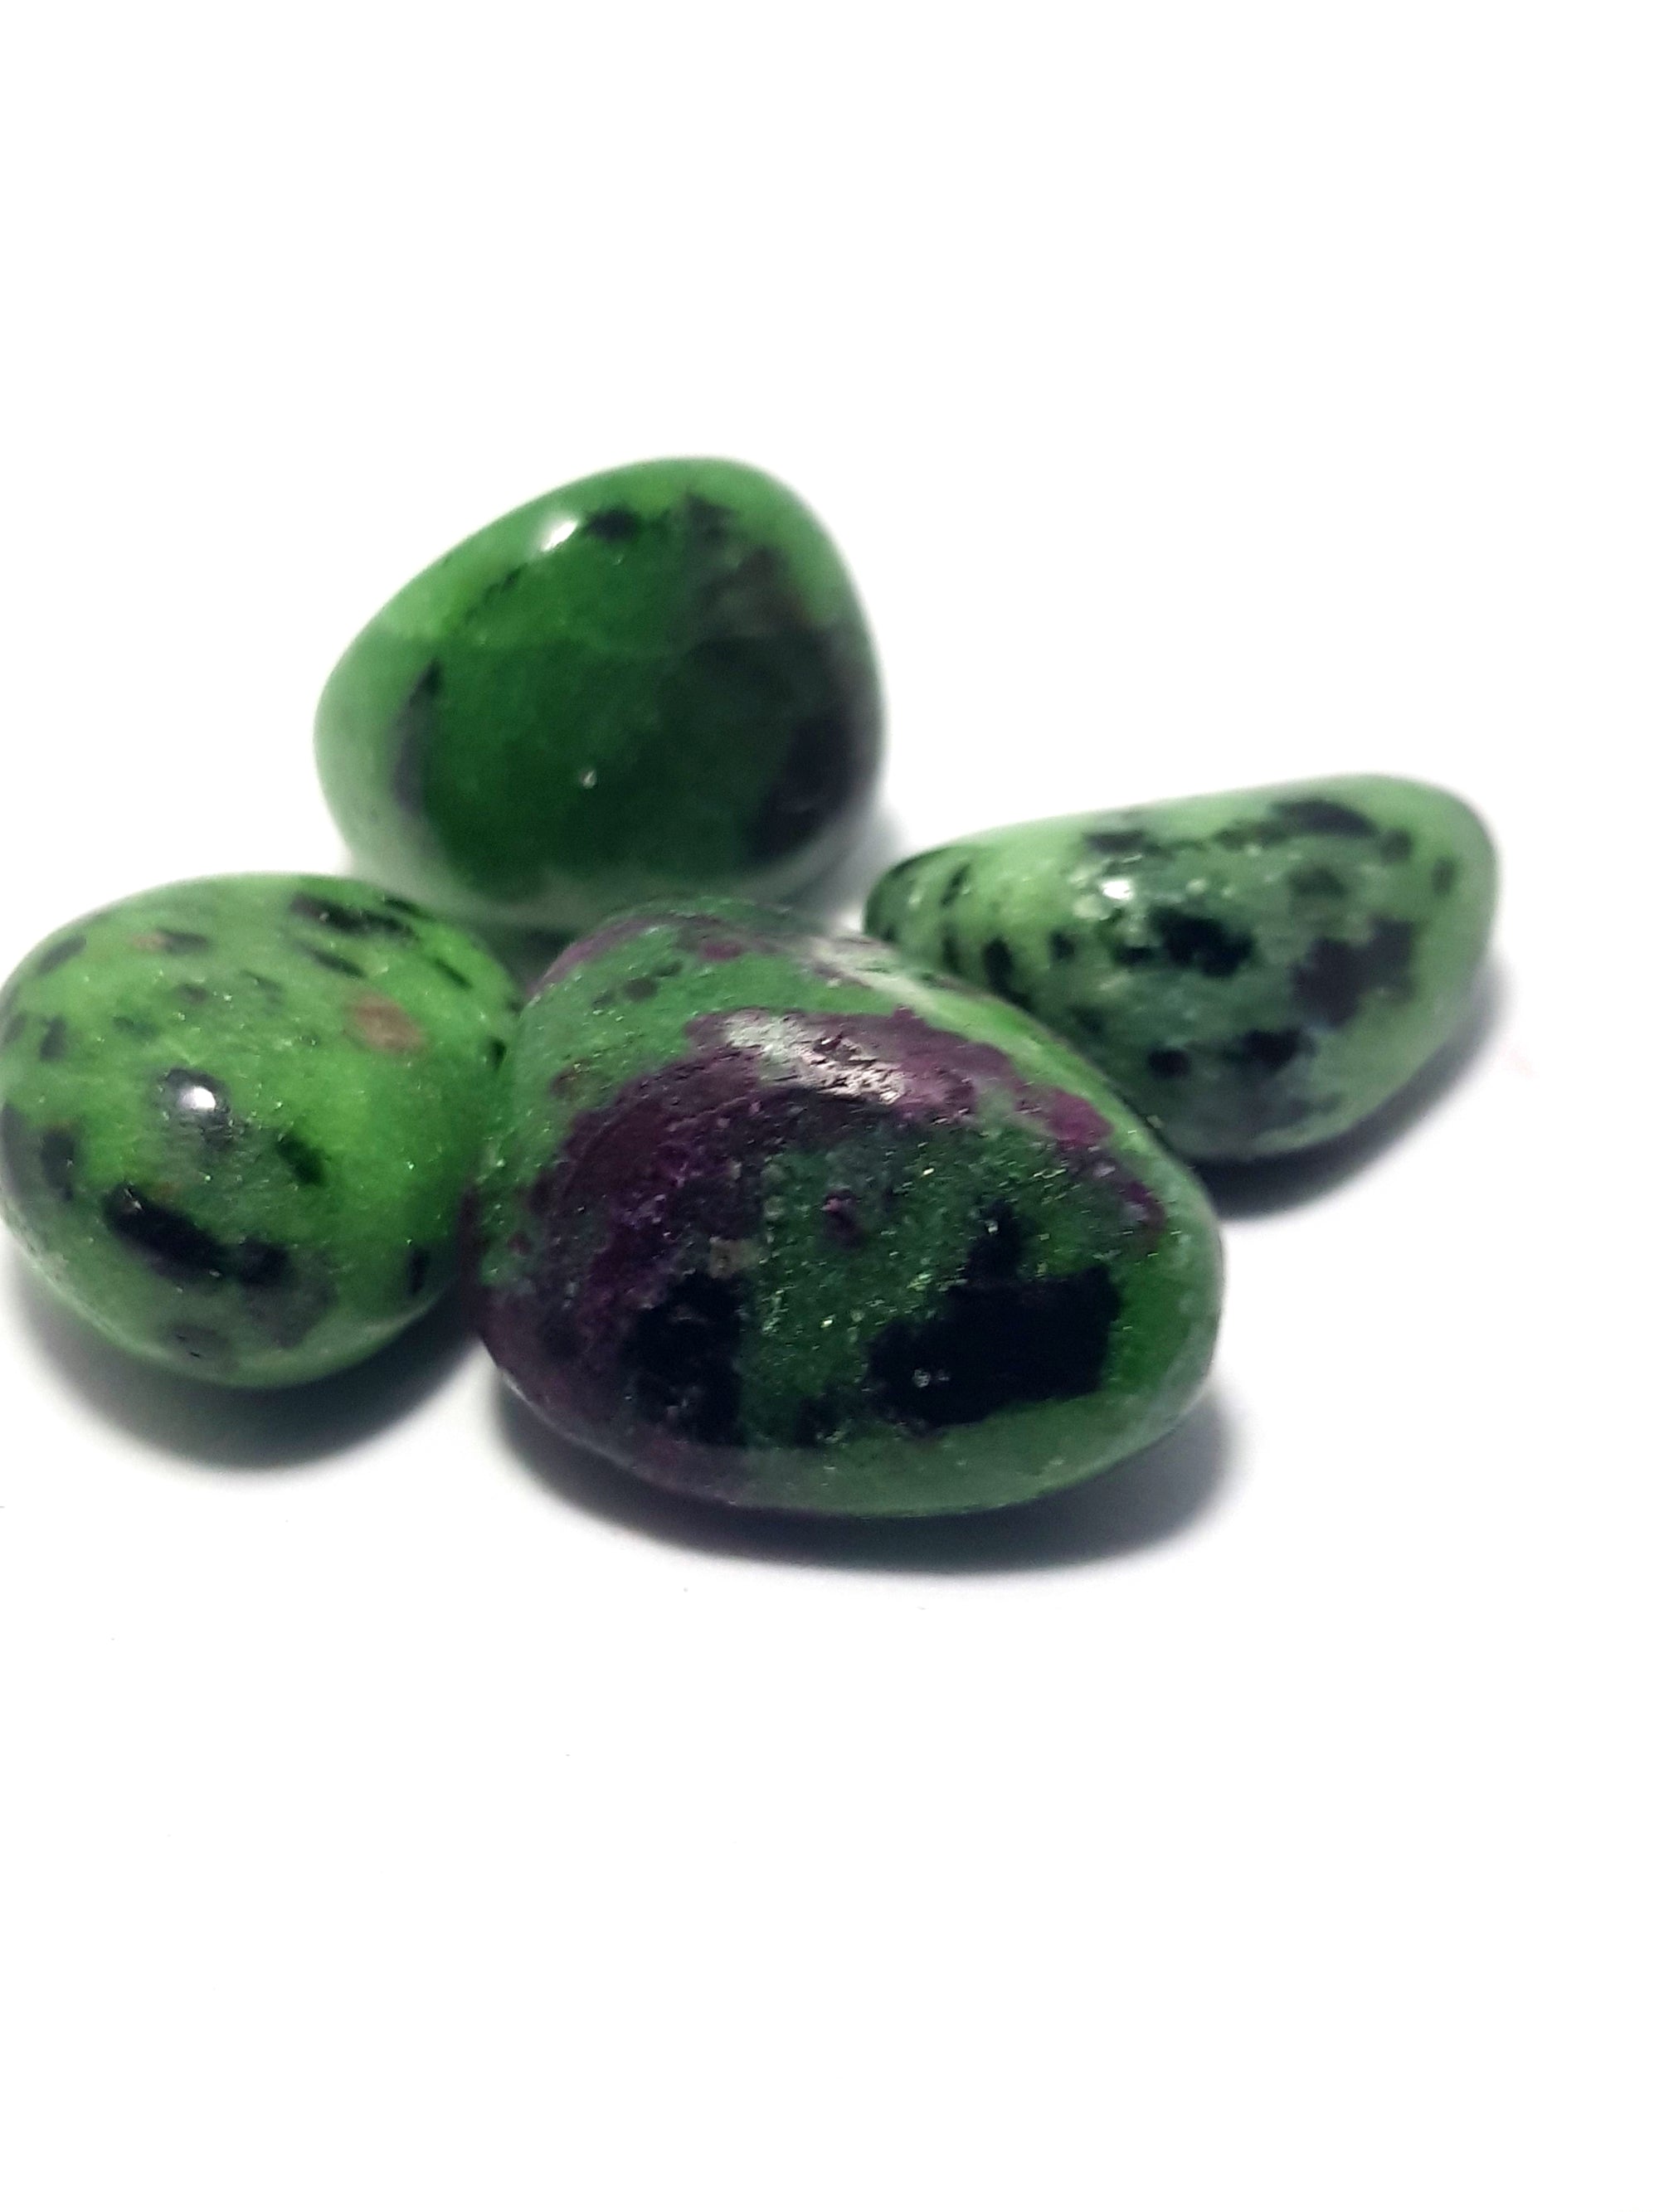 four tumbled pieces of red corundum (ruby) in Zoisite. The corundum is visible as a large purple red patch in the central sample of the image. The zoisite is pistachio green and sparkly. It contains black dots throughout.